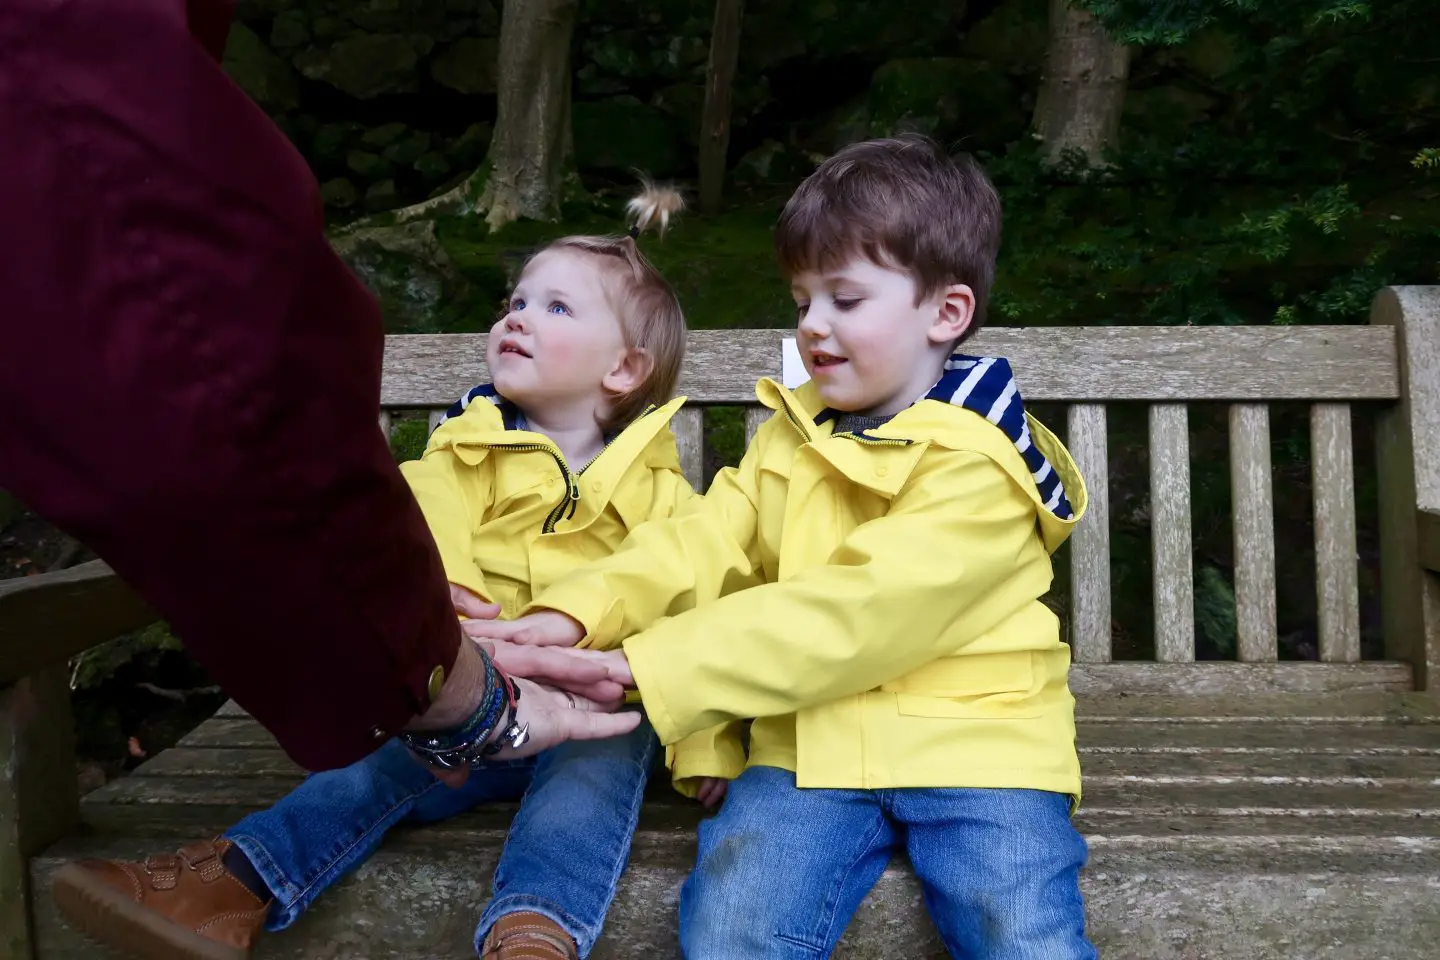 2 boys in matching yellow coats are sitting on a bench and giving their dad a high 5